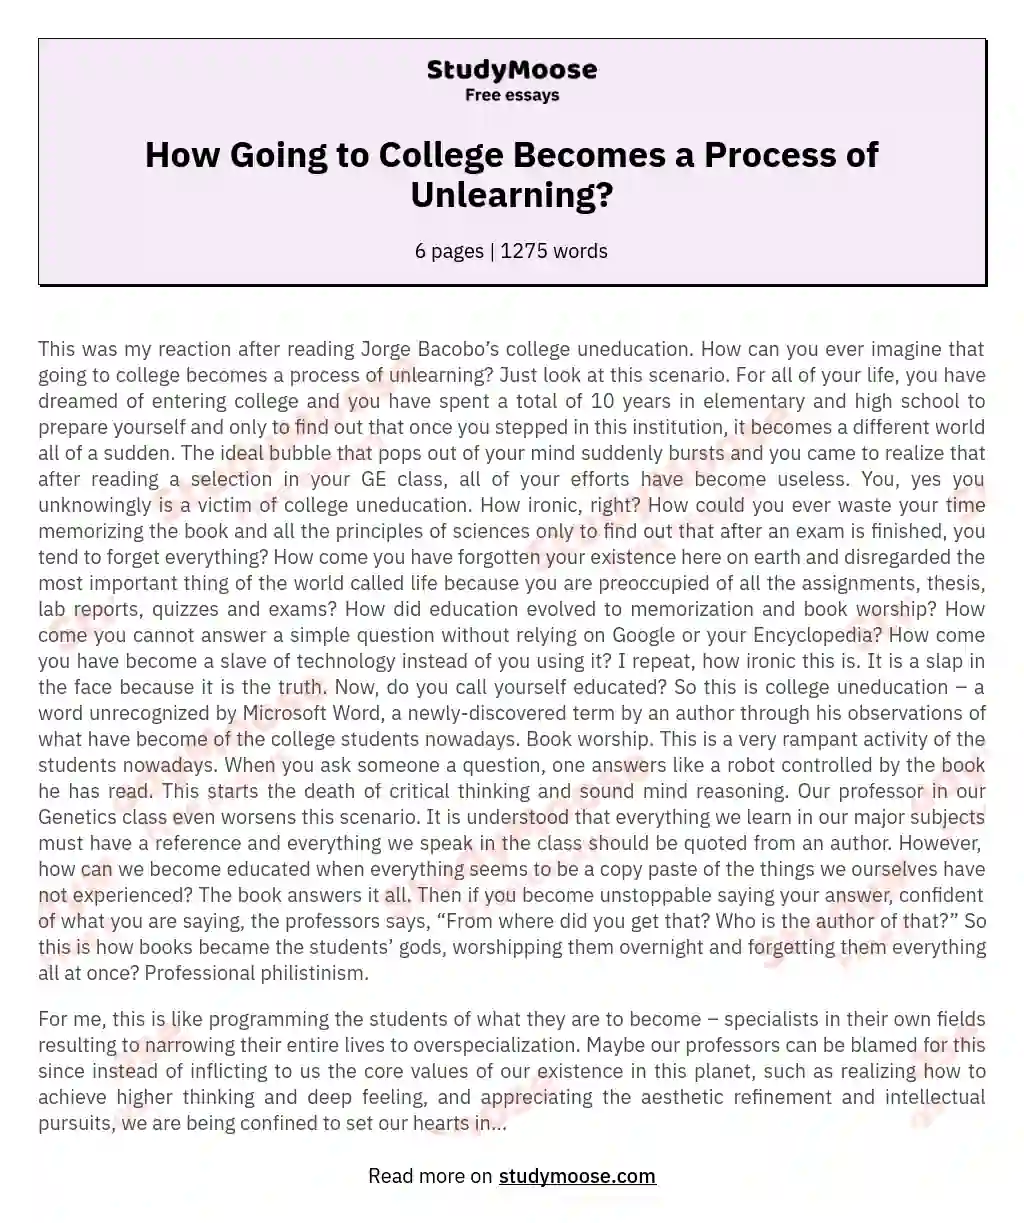 How Going to College Becomes a Process of Unlearning? essay